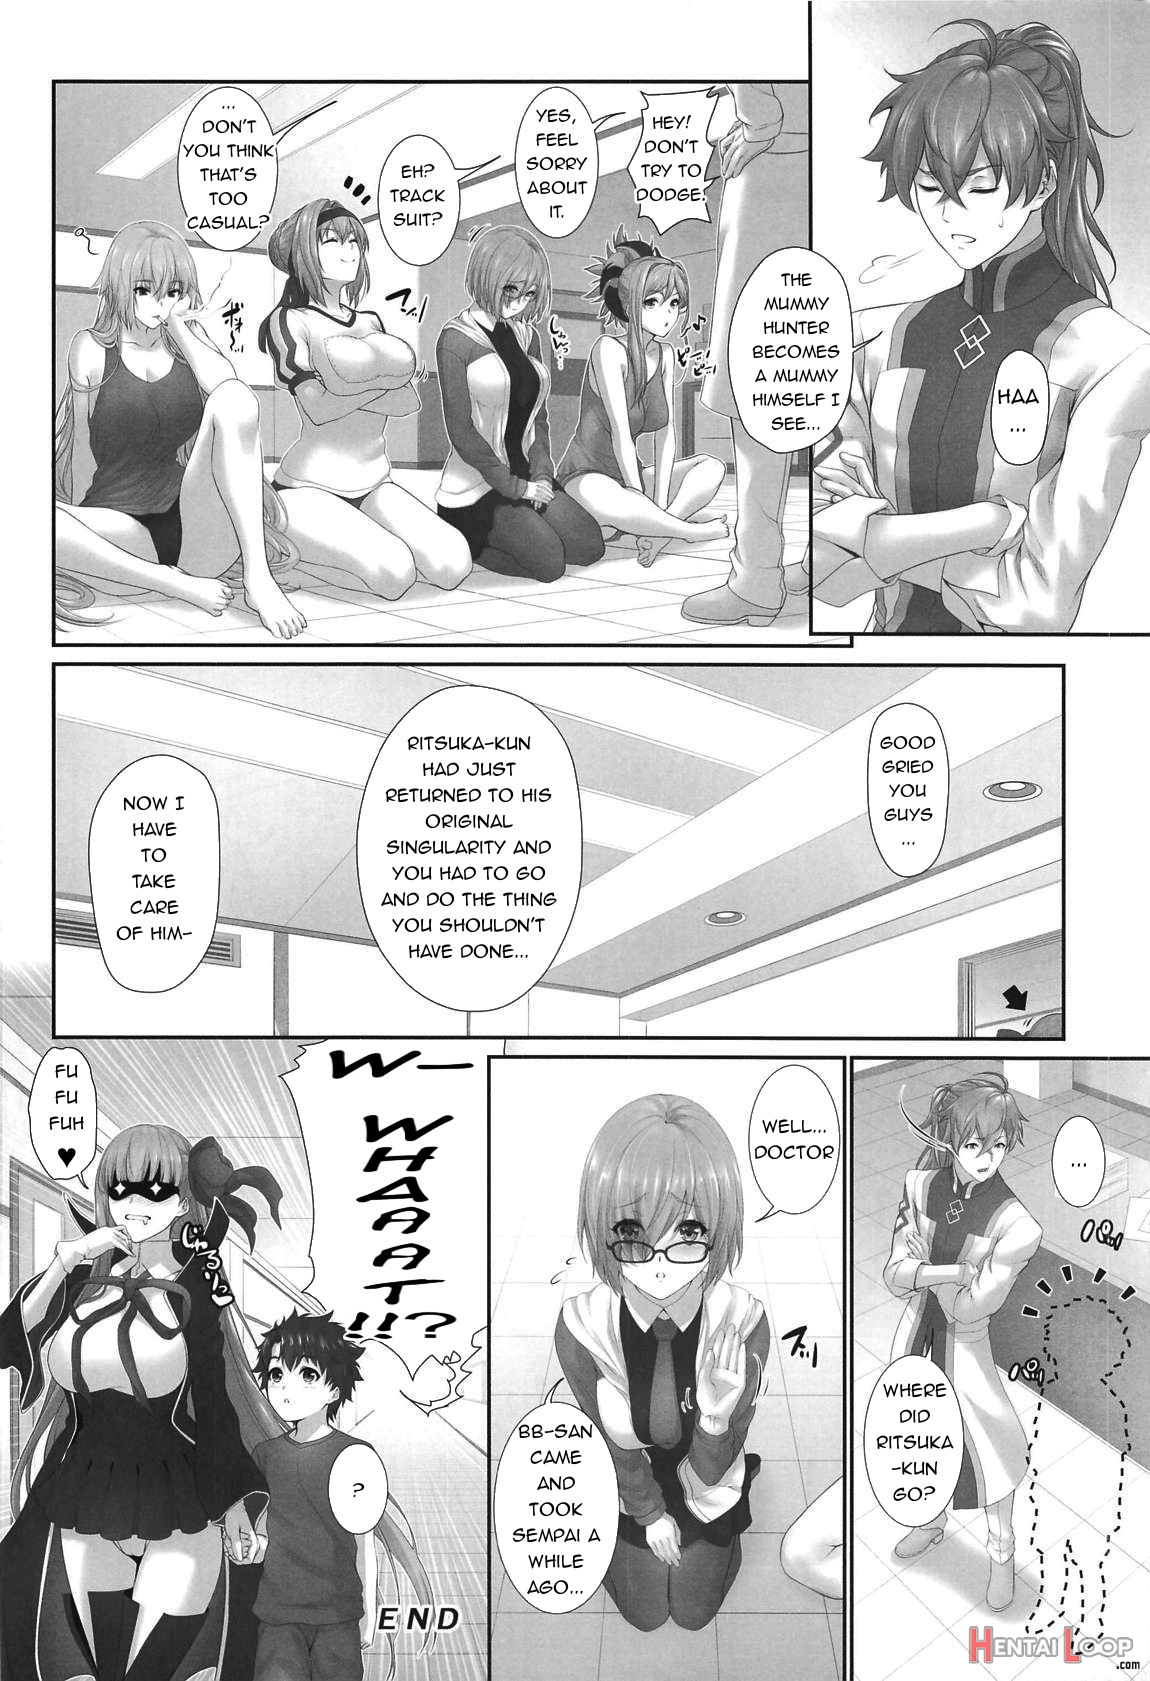 Ritsukakun's Misfortune? 2 The Targeted Lamb!? page 20